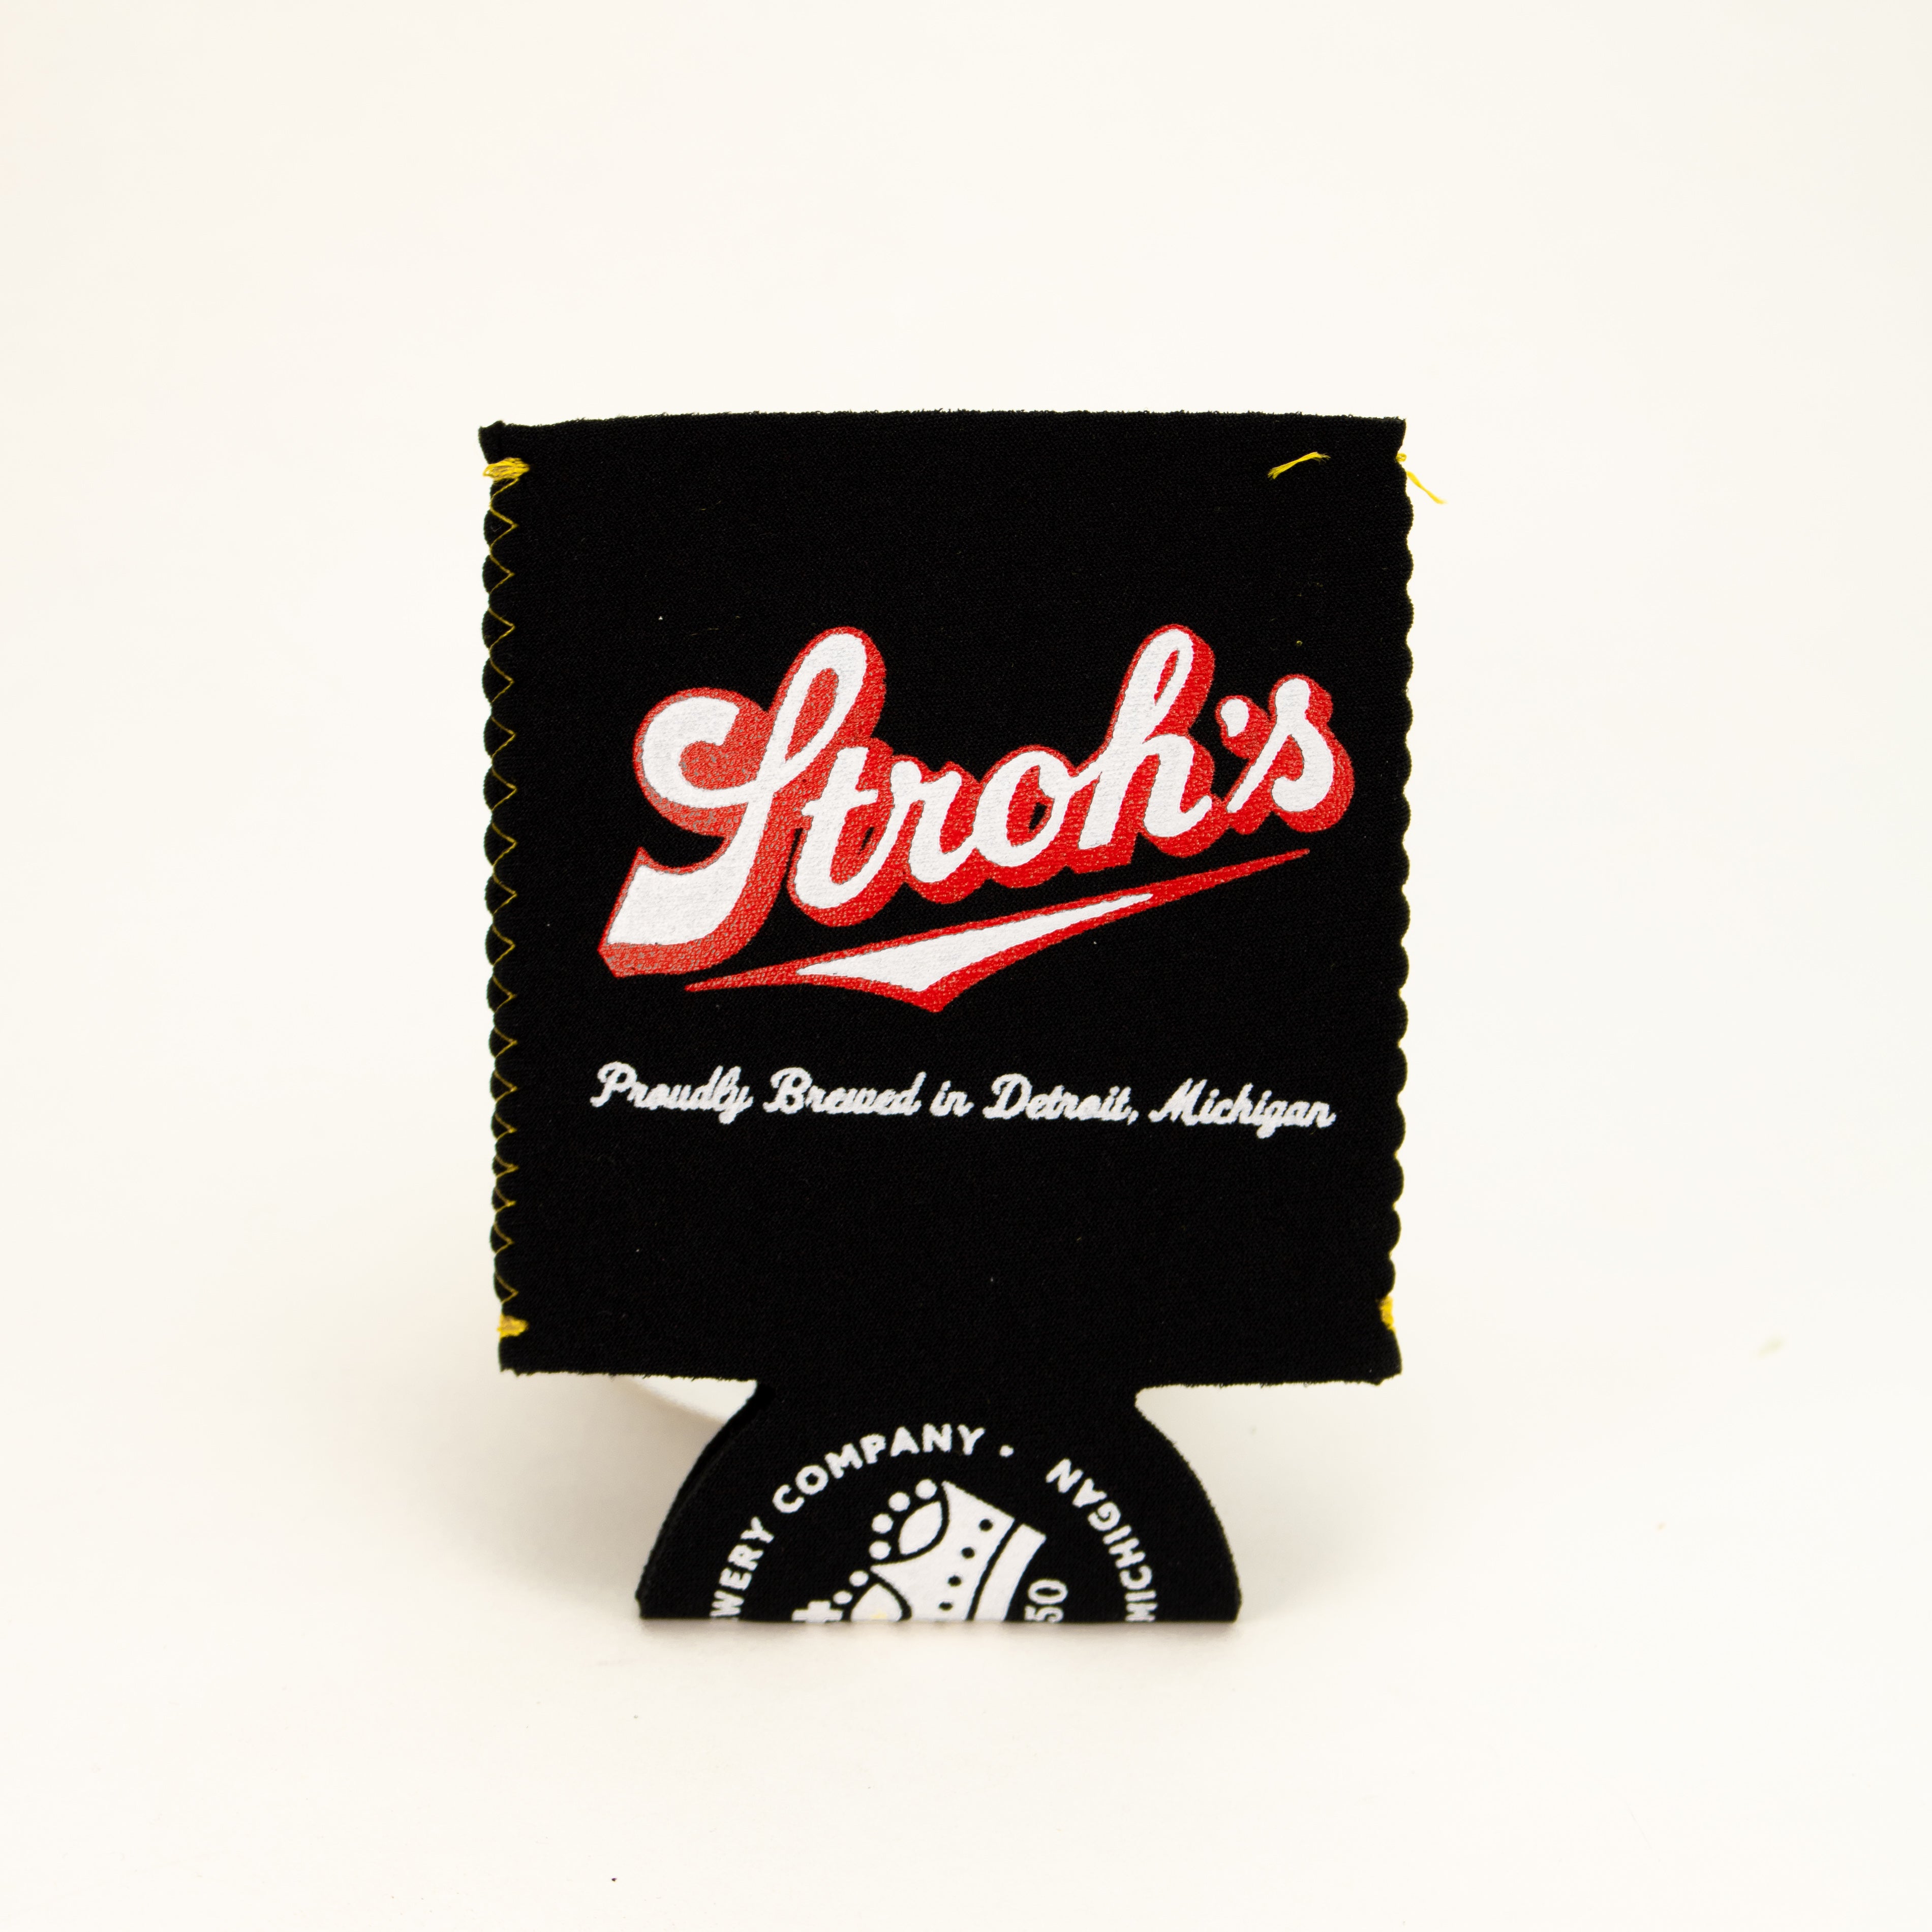 Coozie - Stroh's is Spoken Here